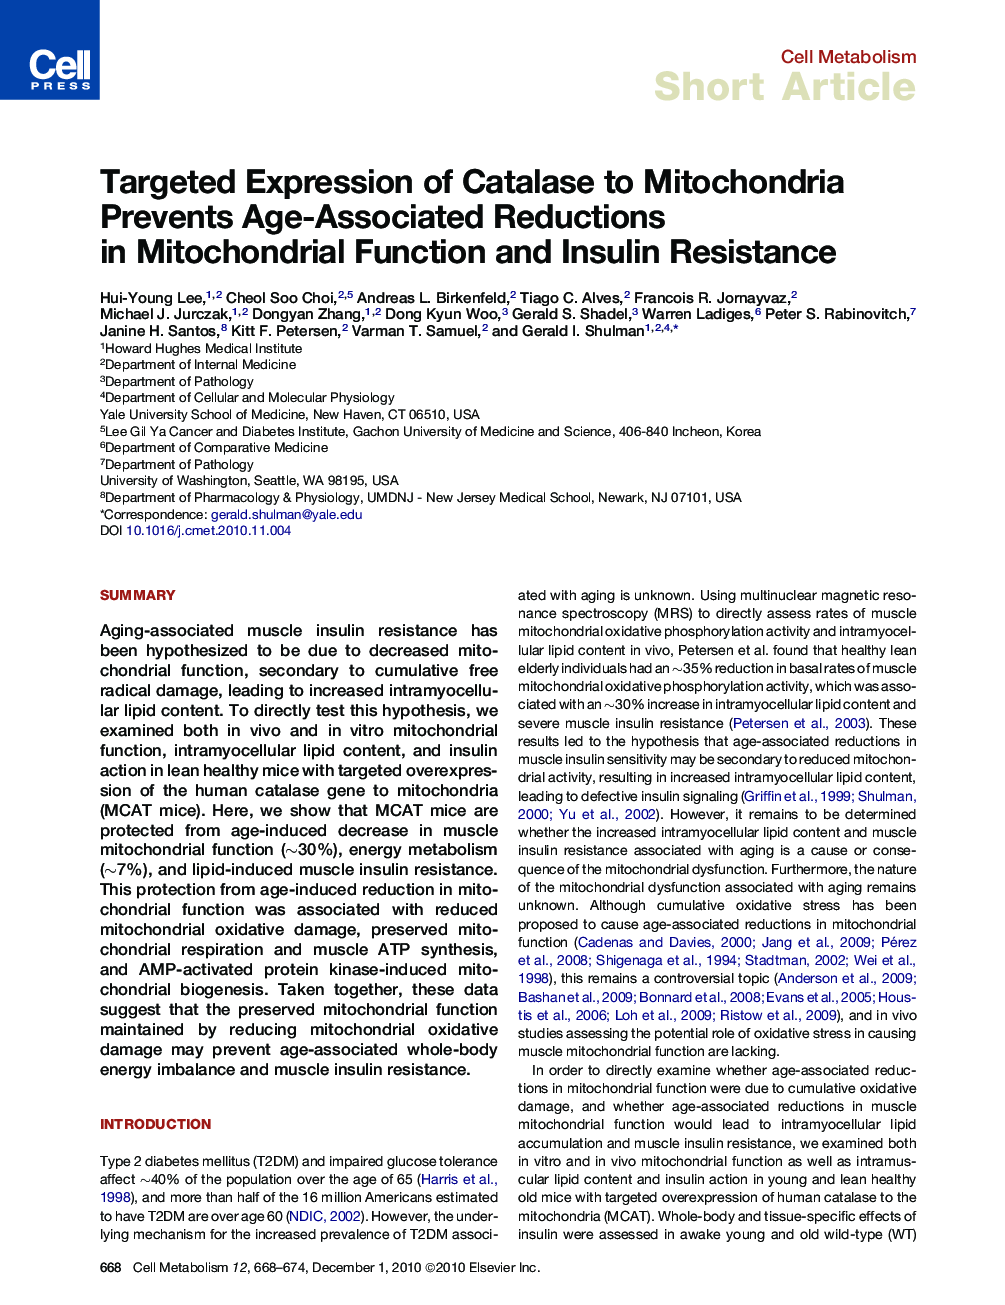 Targeted Expression of Catalase to Mitochondria Prevents Age-Associated Reductions in Mitochondrial Function and Insulin Resistance